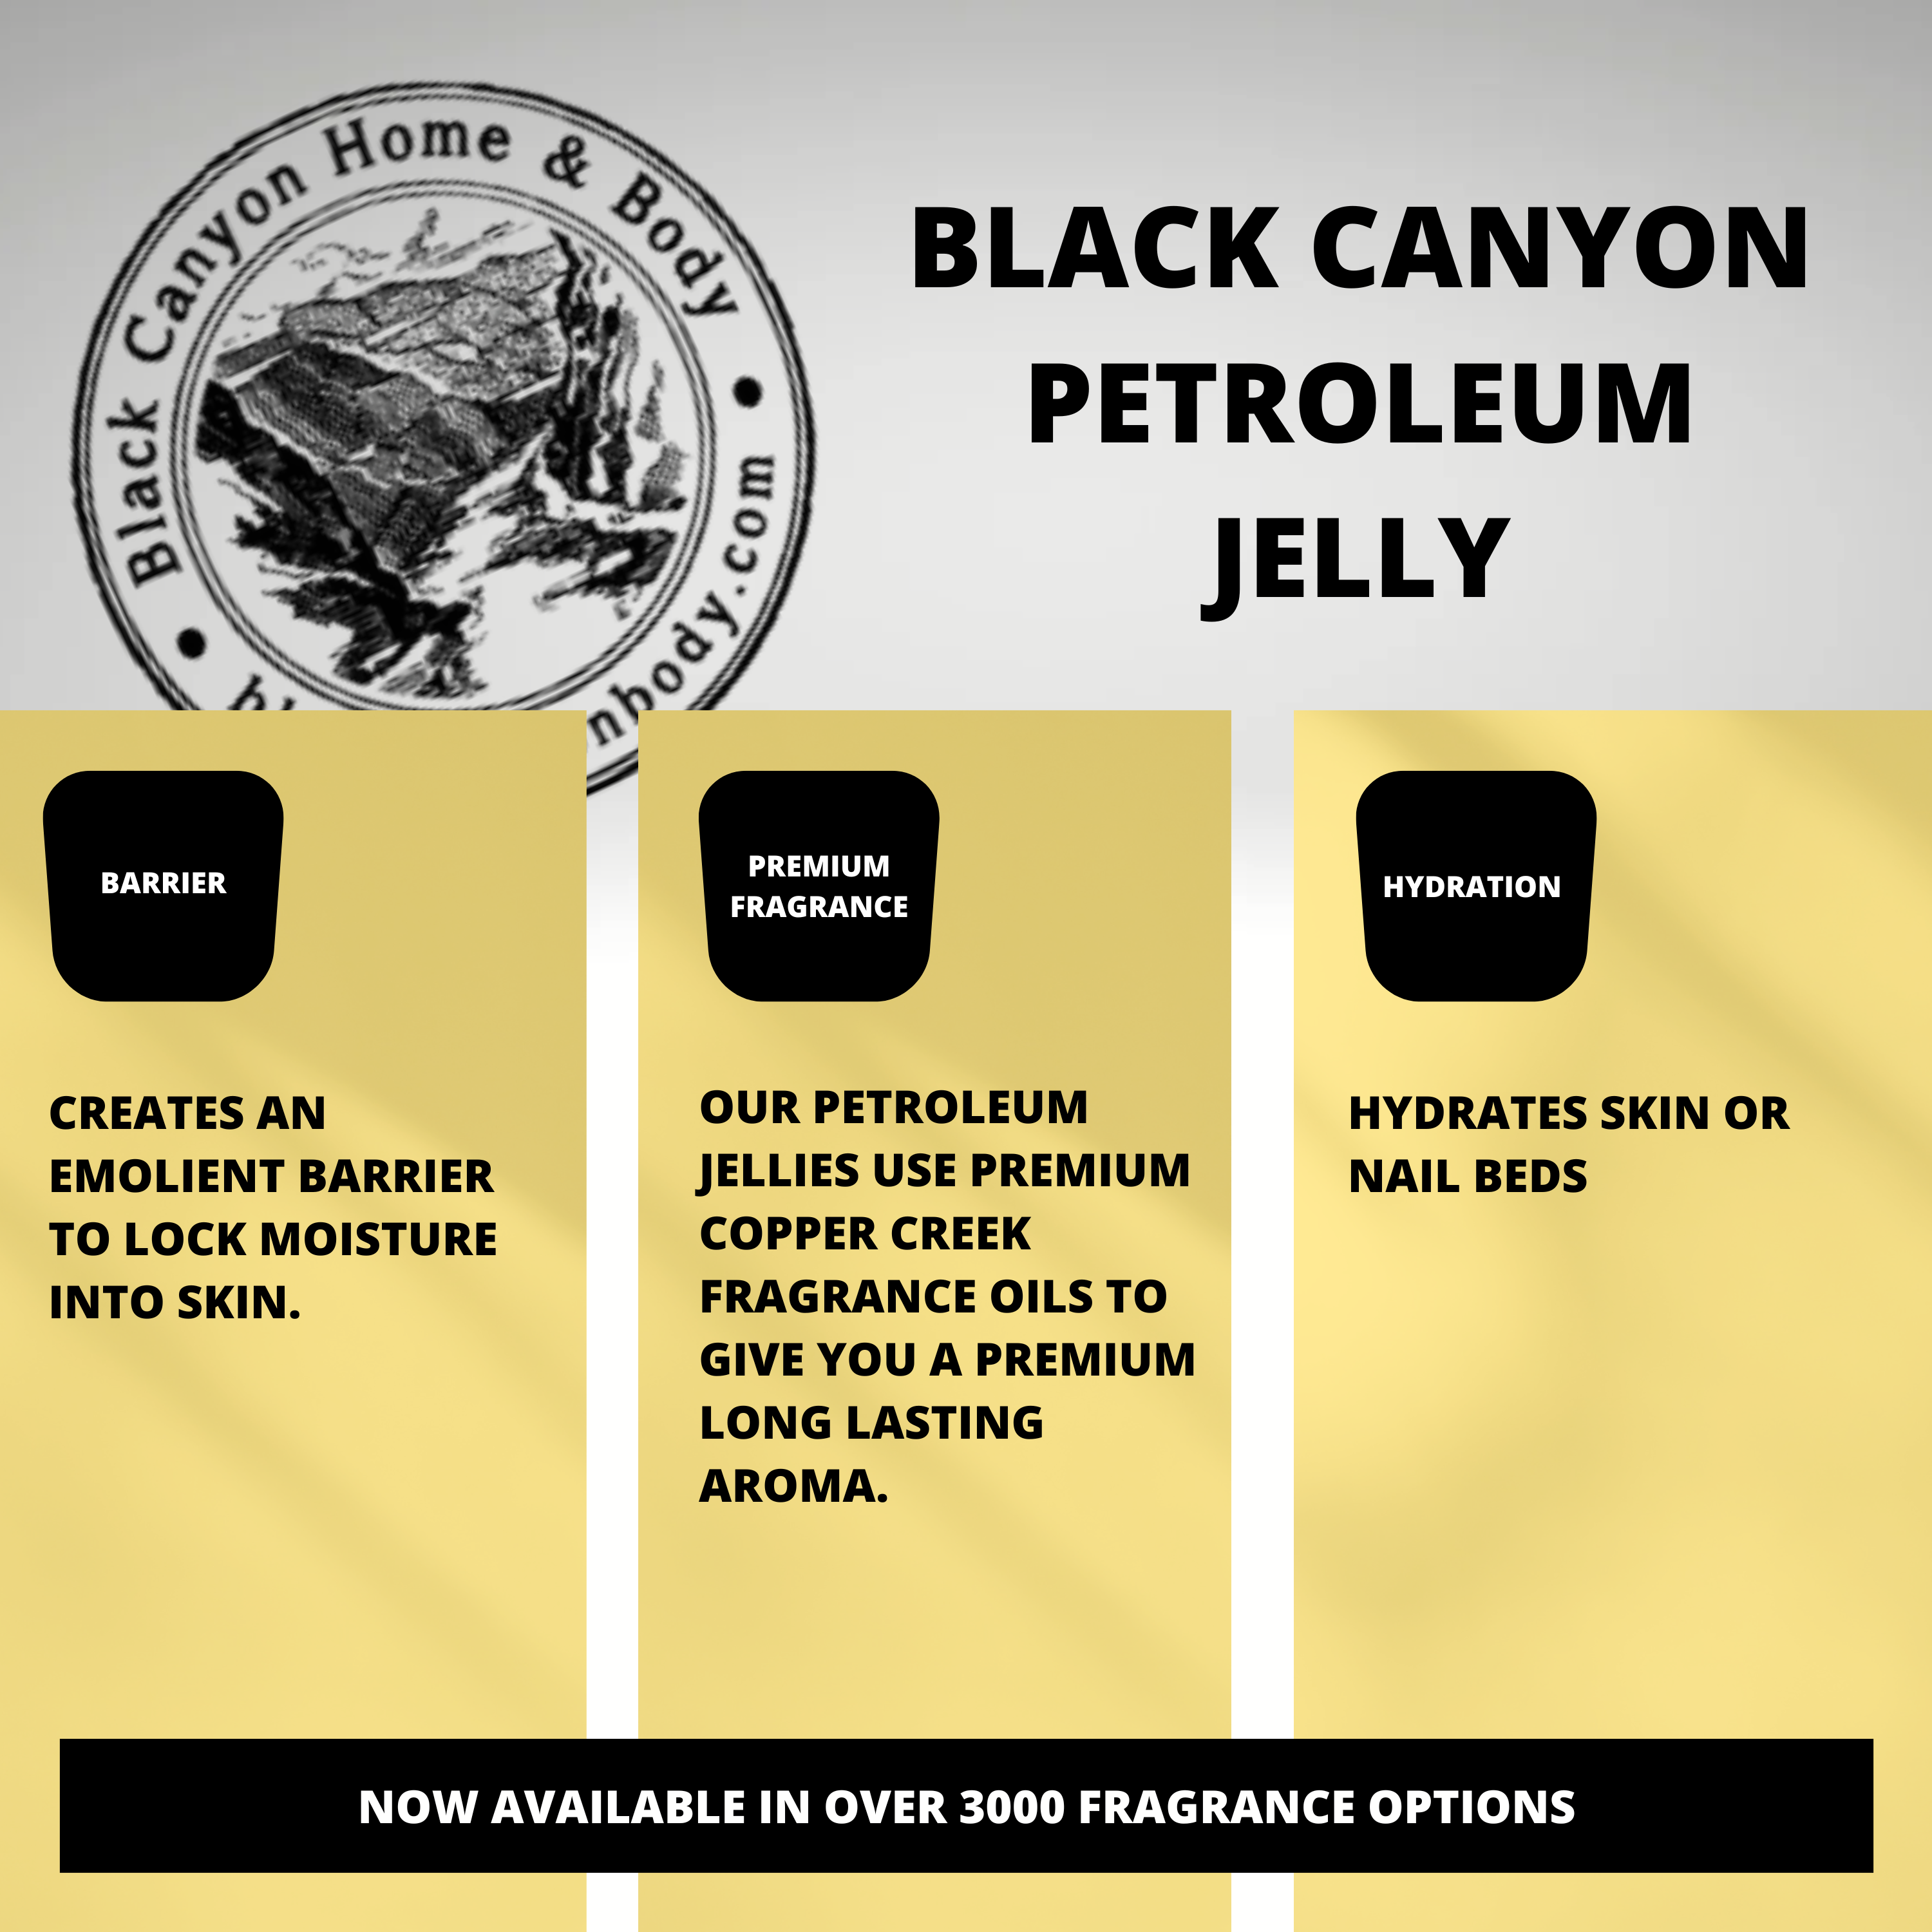 Black Canyon Dark Chocolate Scented Petroleum Jelly